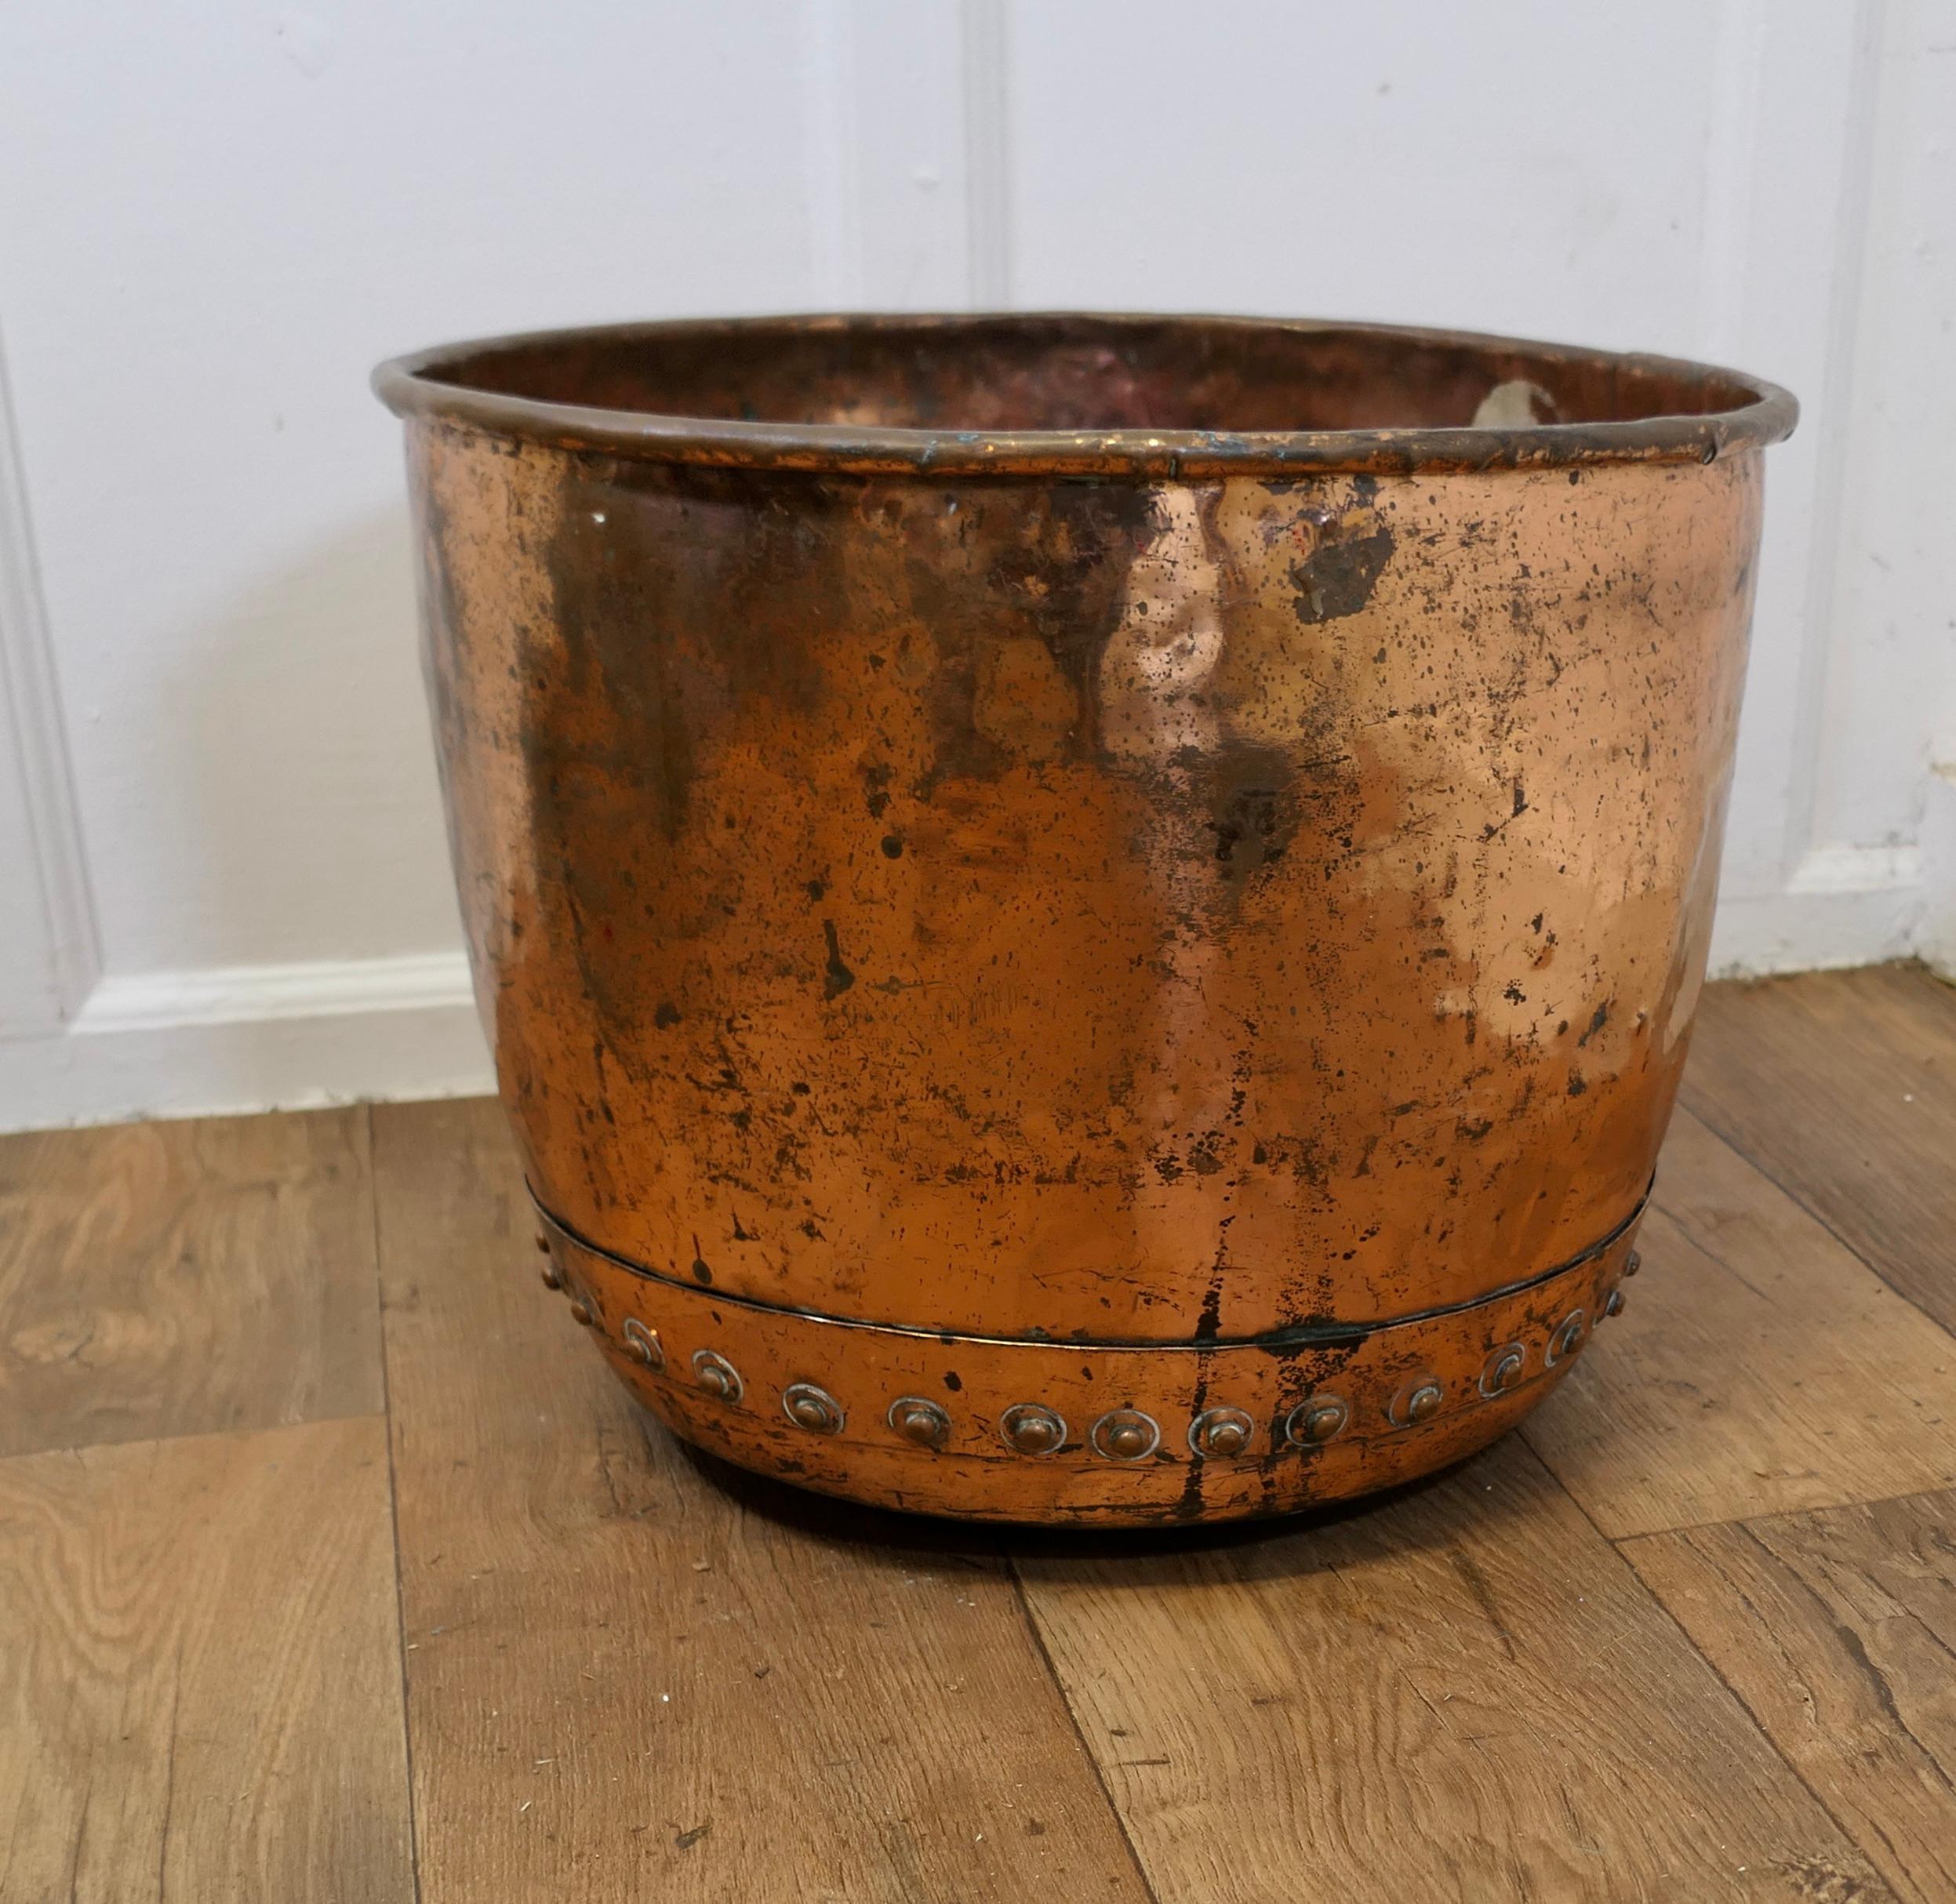 19th Century Copper Log Bin or Cauldron Planter

This is a superior quality copper, it has a heavily riveted construction, very strong with a good patina 

The Copper Cauldron would work well as a log basket or as a planter for a large plant

The